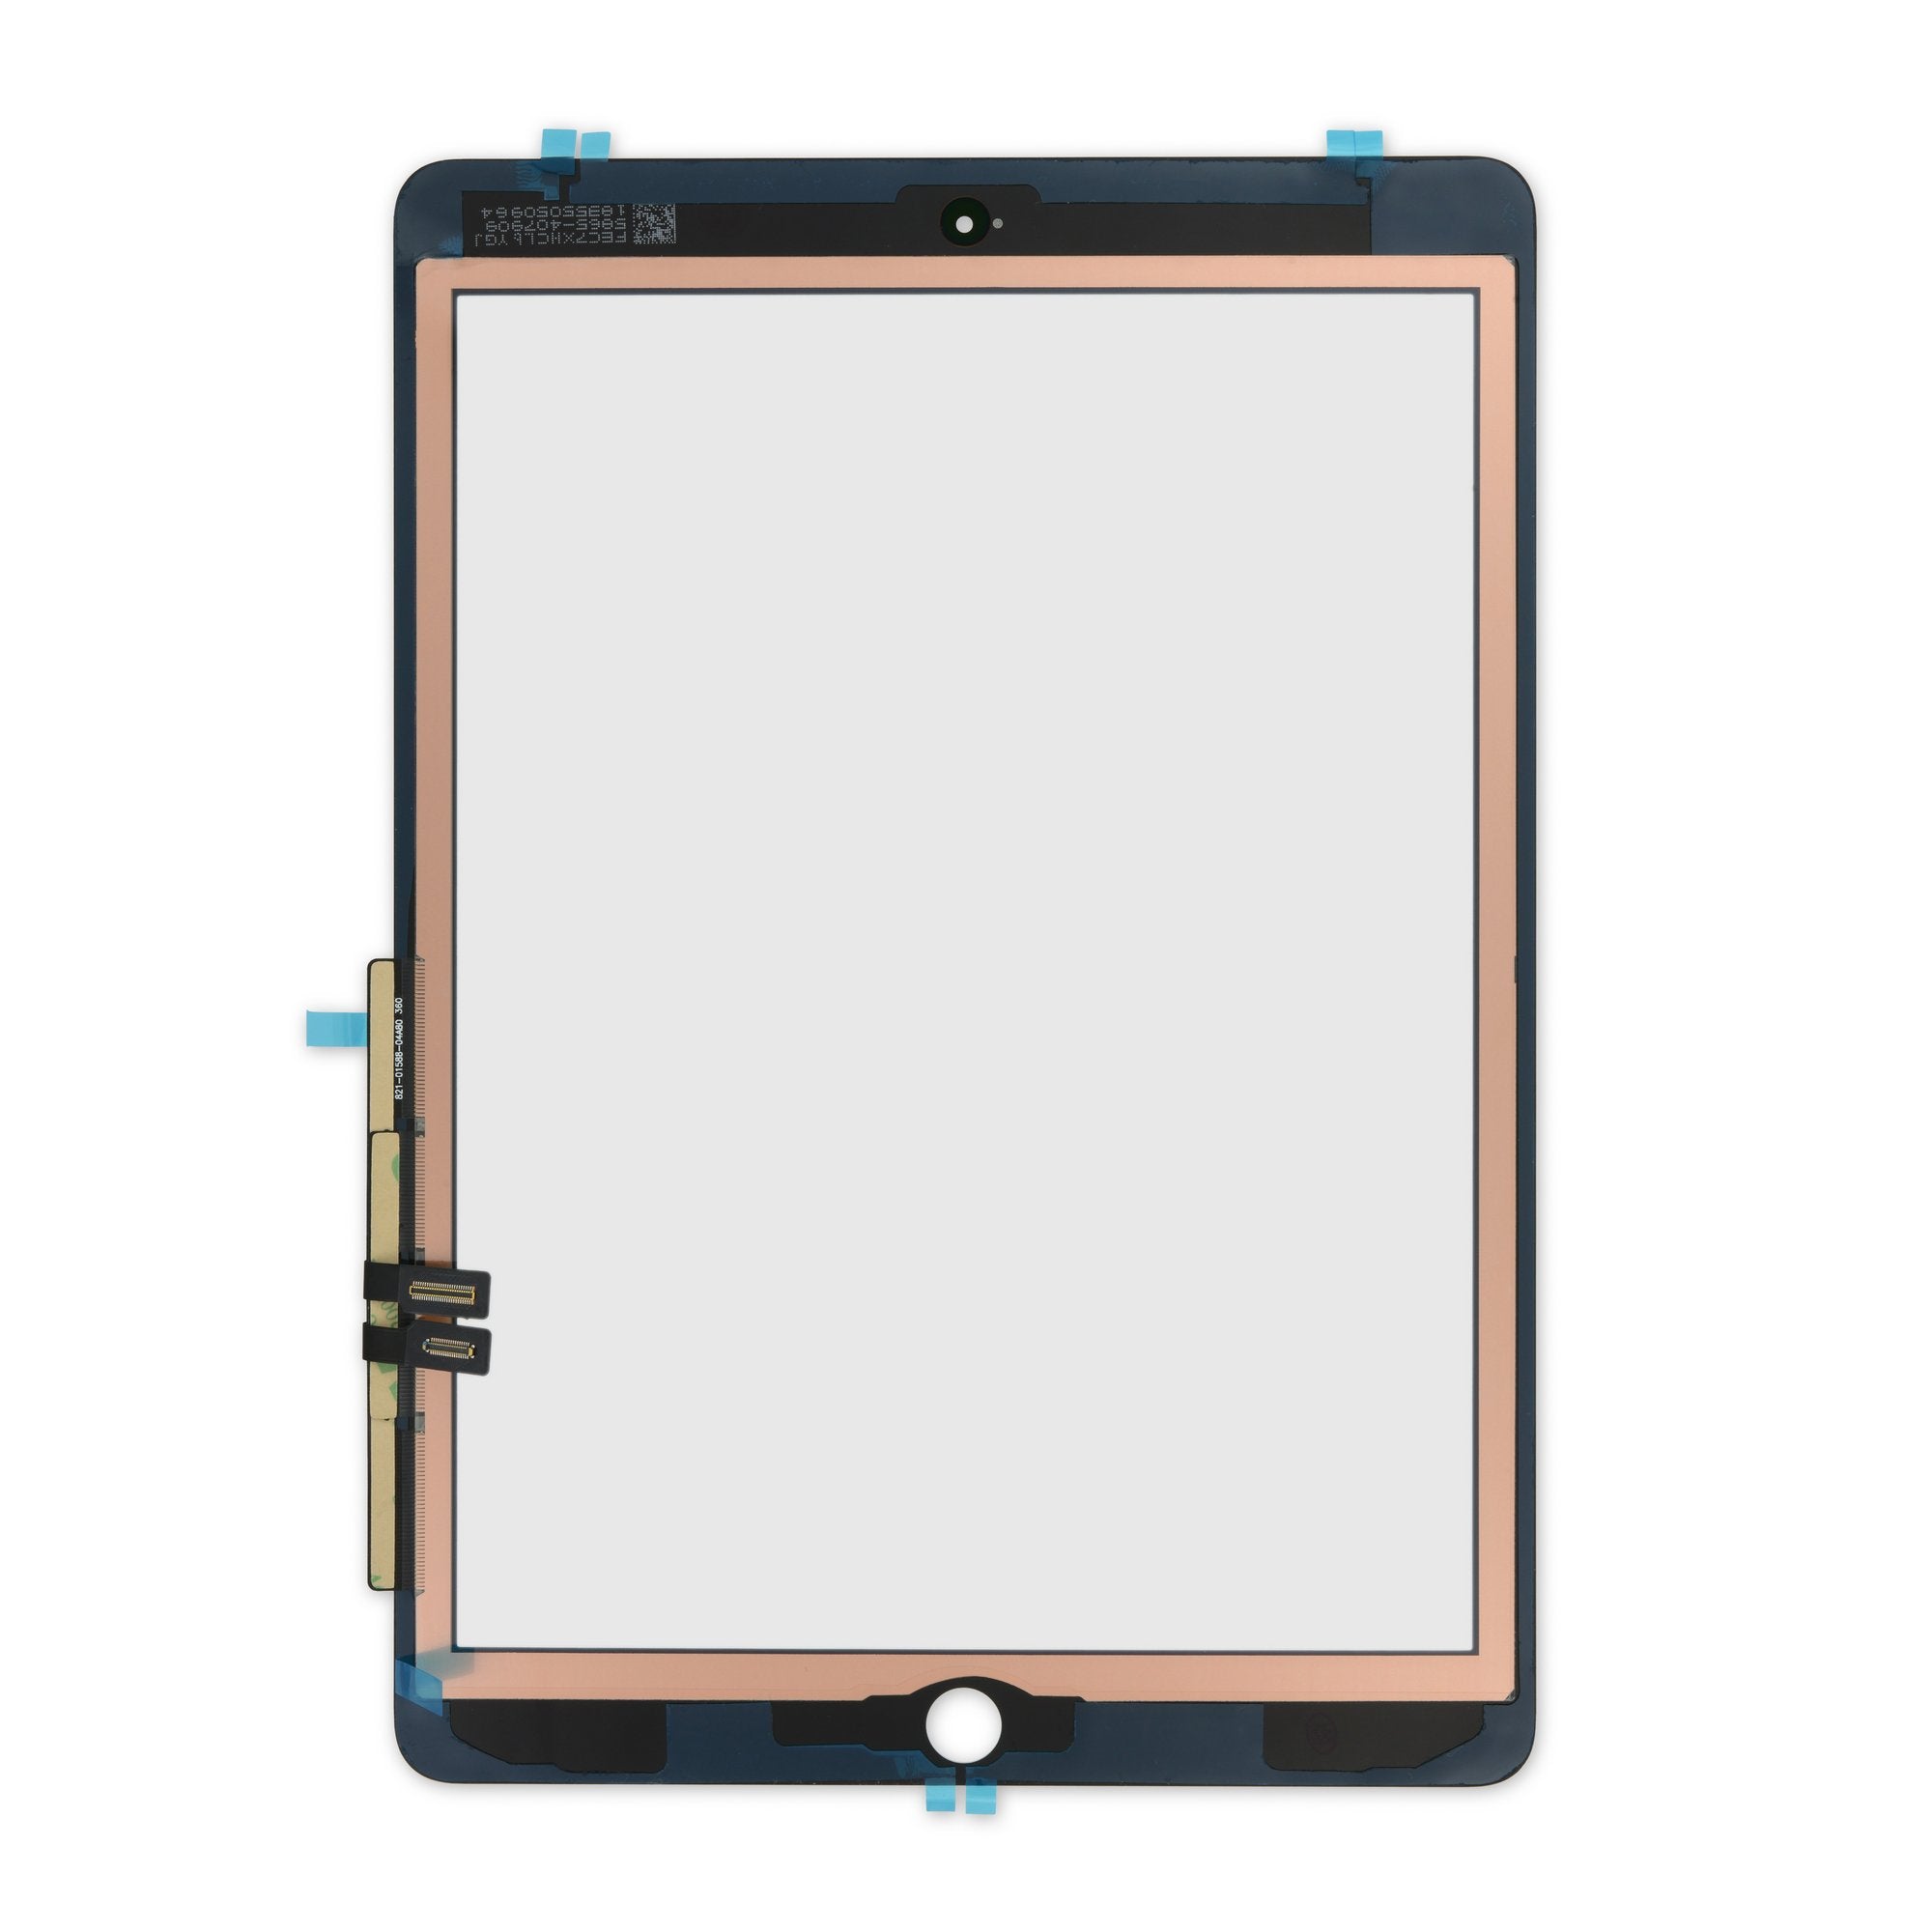 iPad 6 A1893 Screen: Glass Digitizer Replacement Kit - iFixit